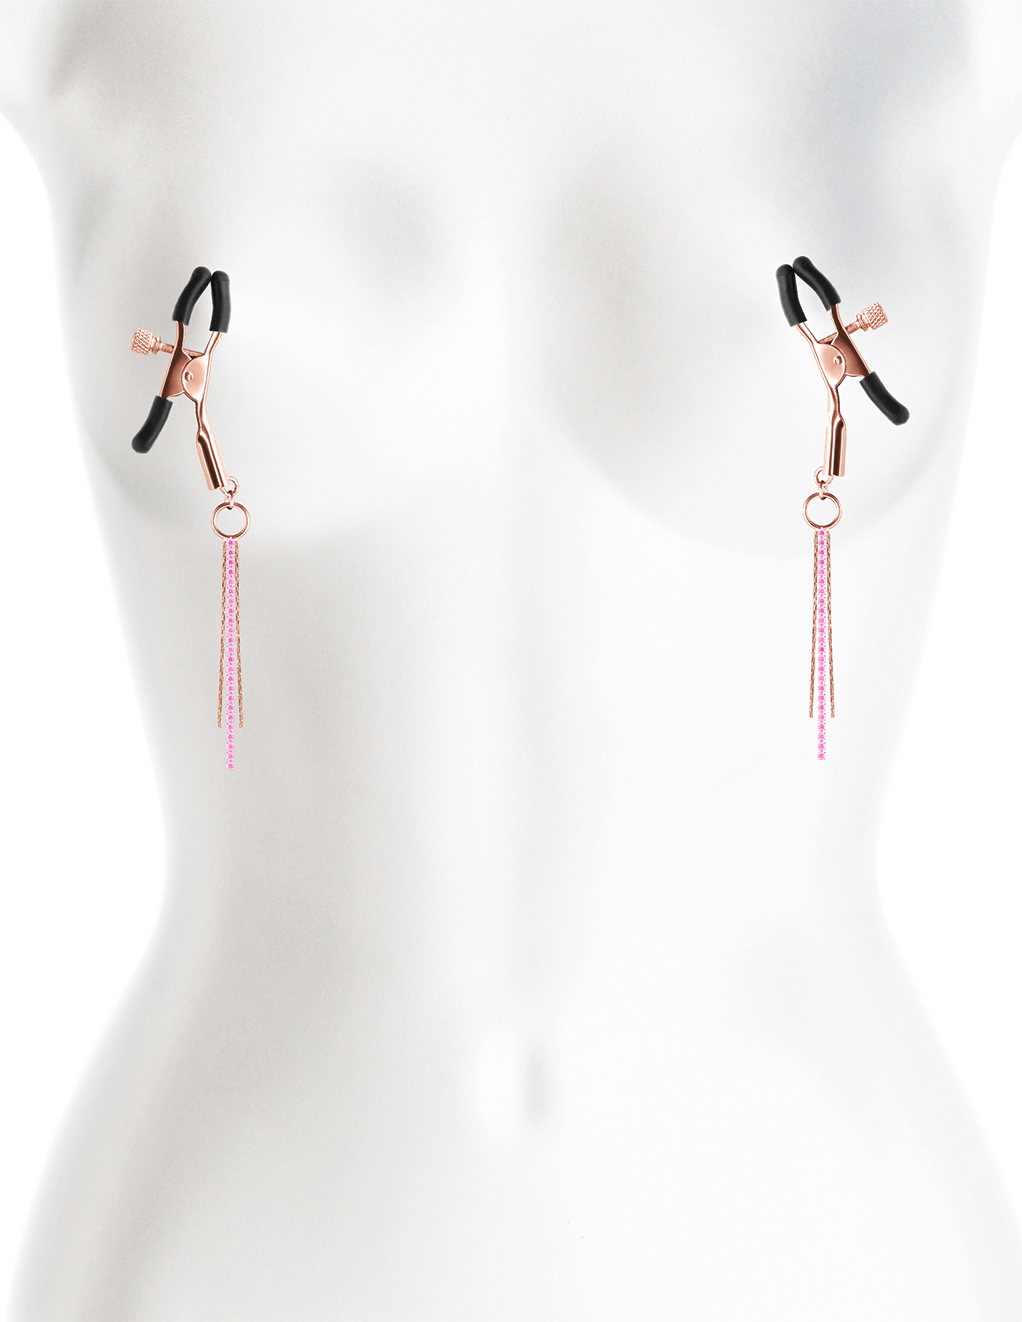 Adjustable Metal 3 Tassle Clamps D3 - Rose Gold Clamps